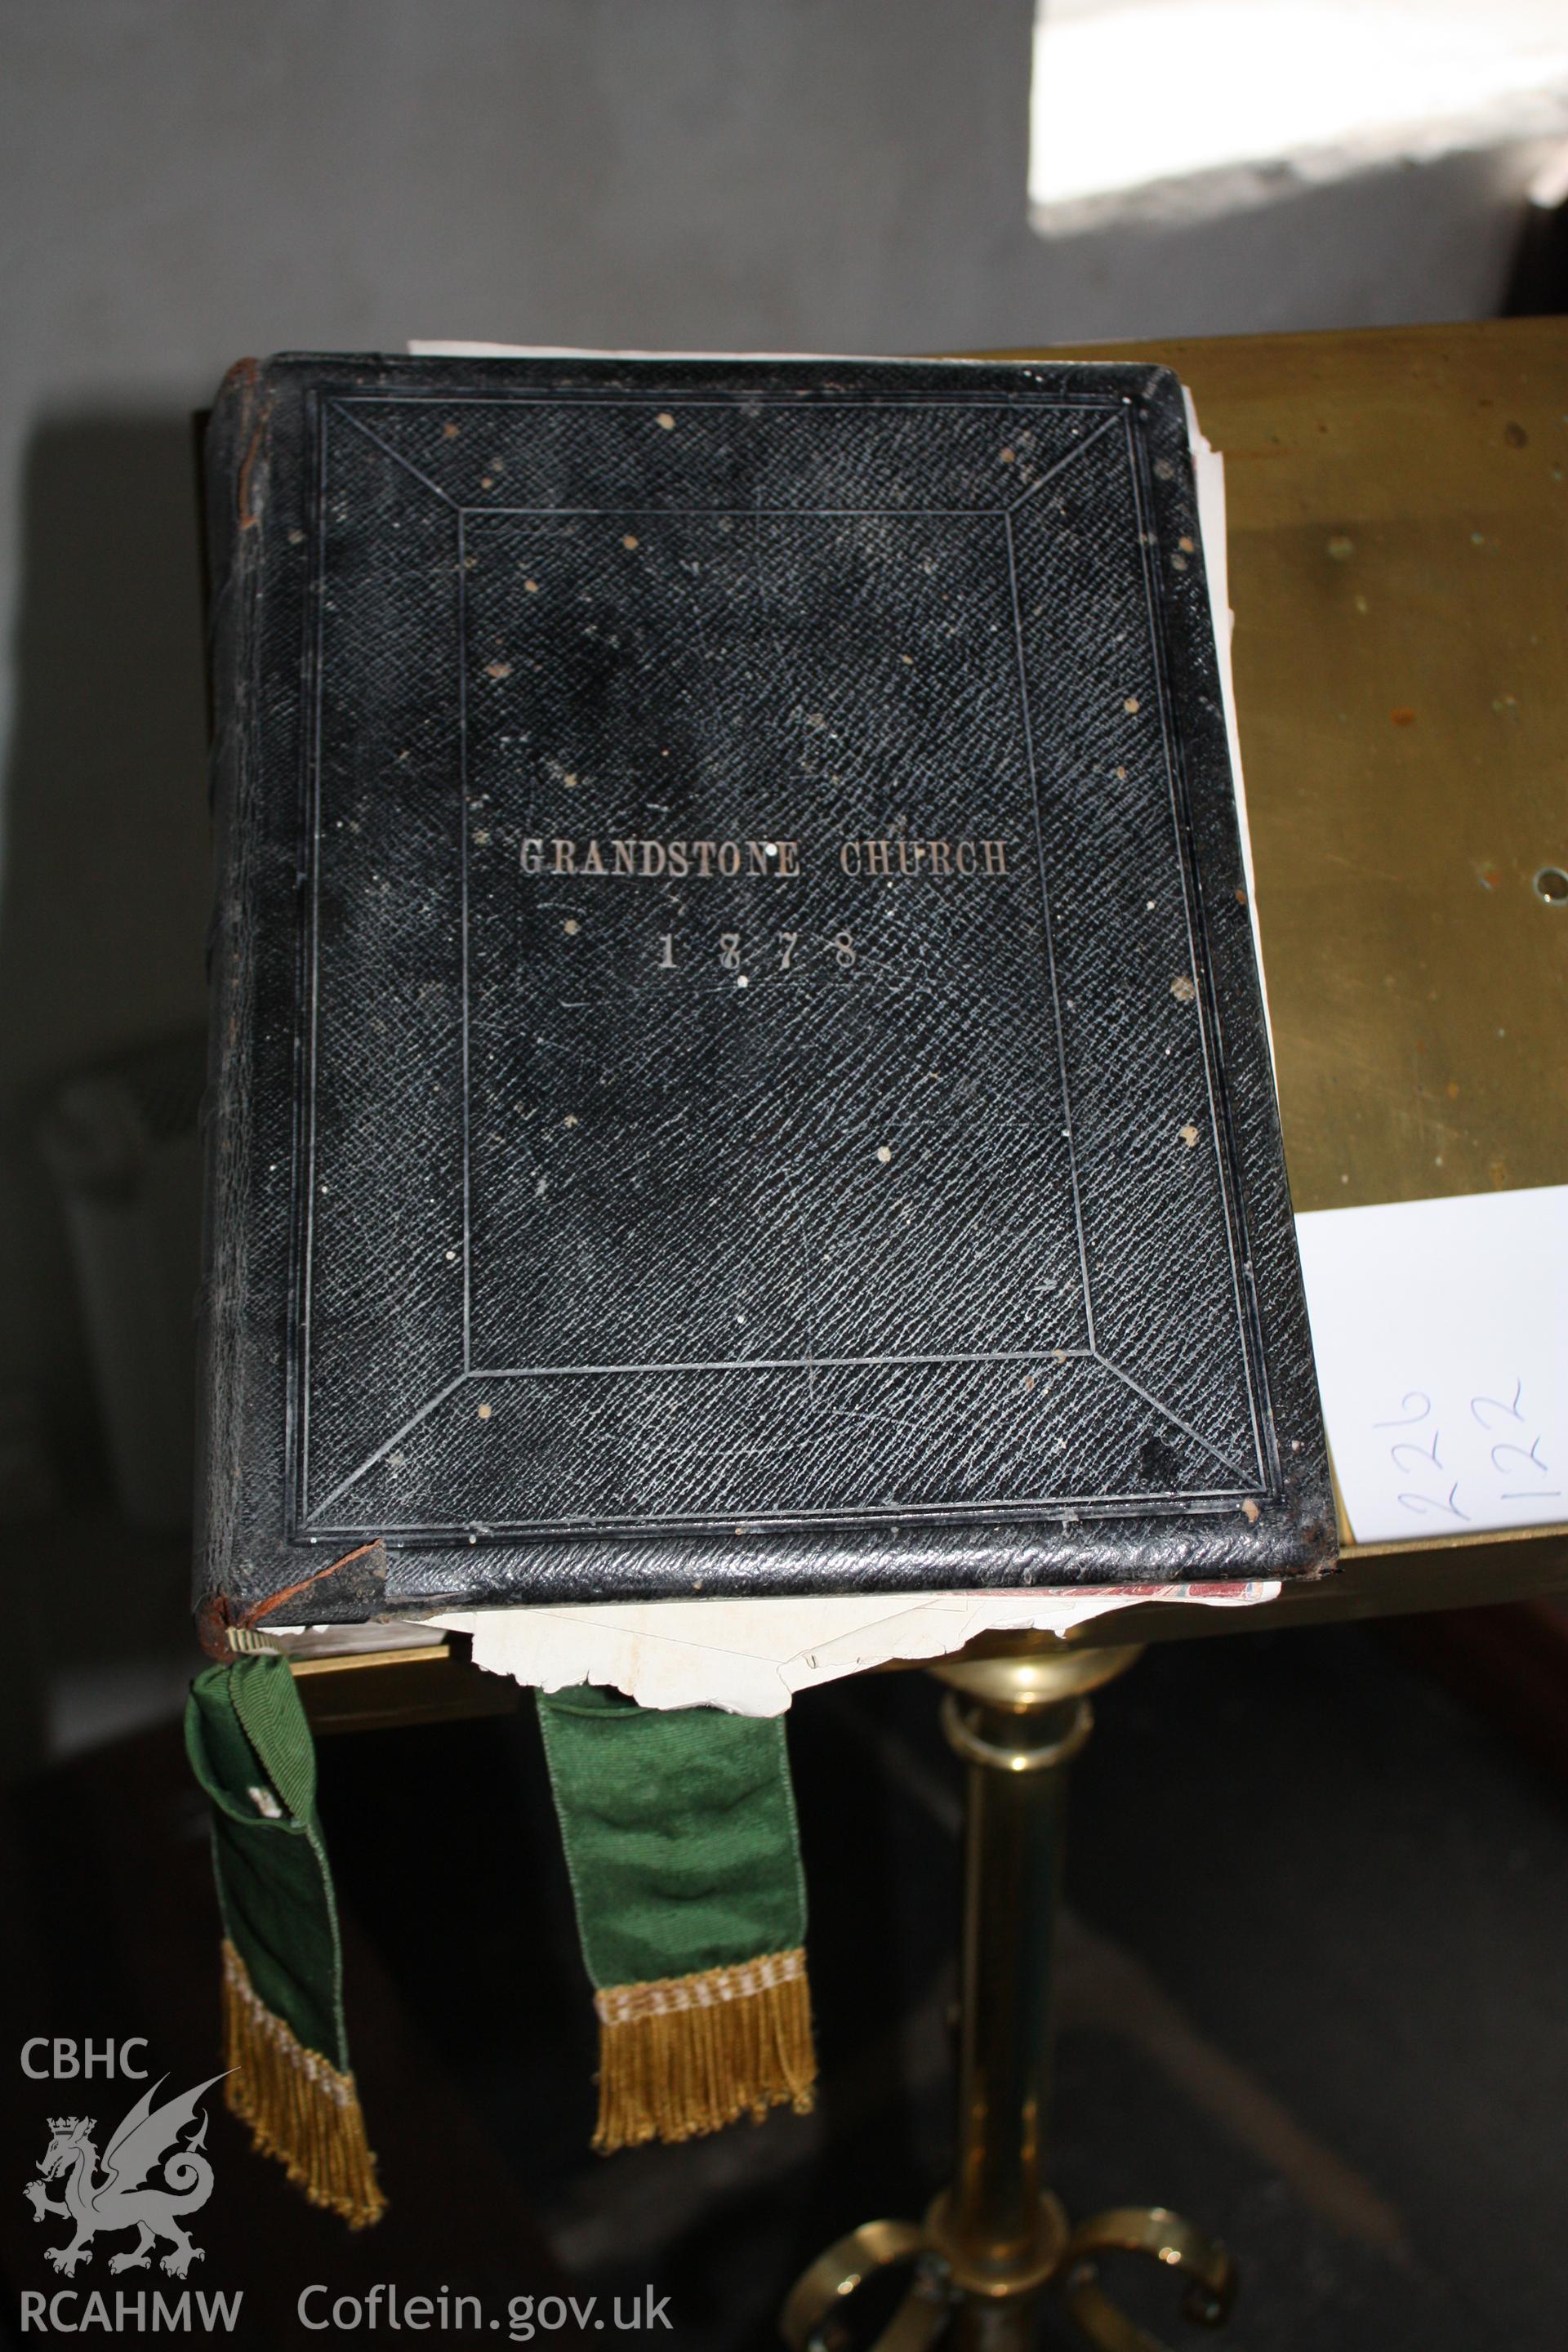 Church bible dated 1878, perhaps suggesting the date of completion of the rebuilding of church